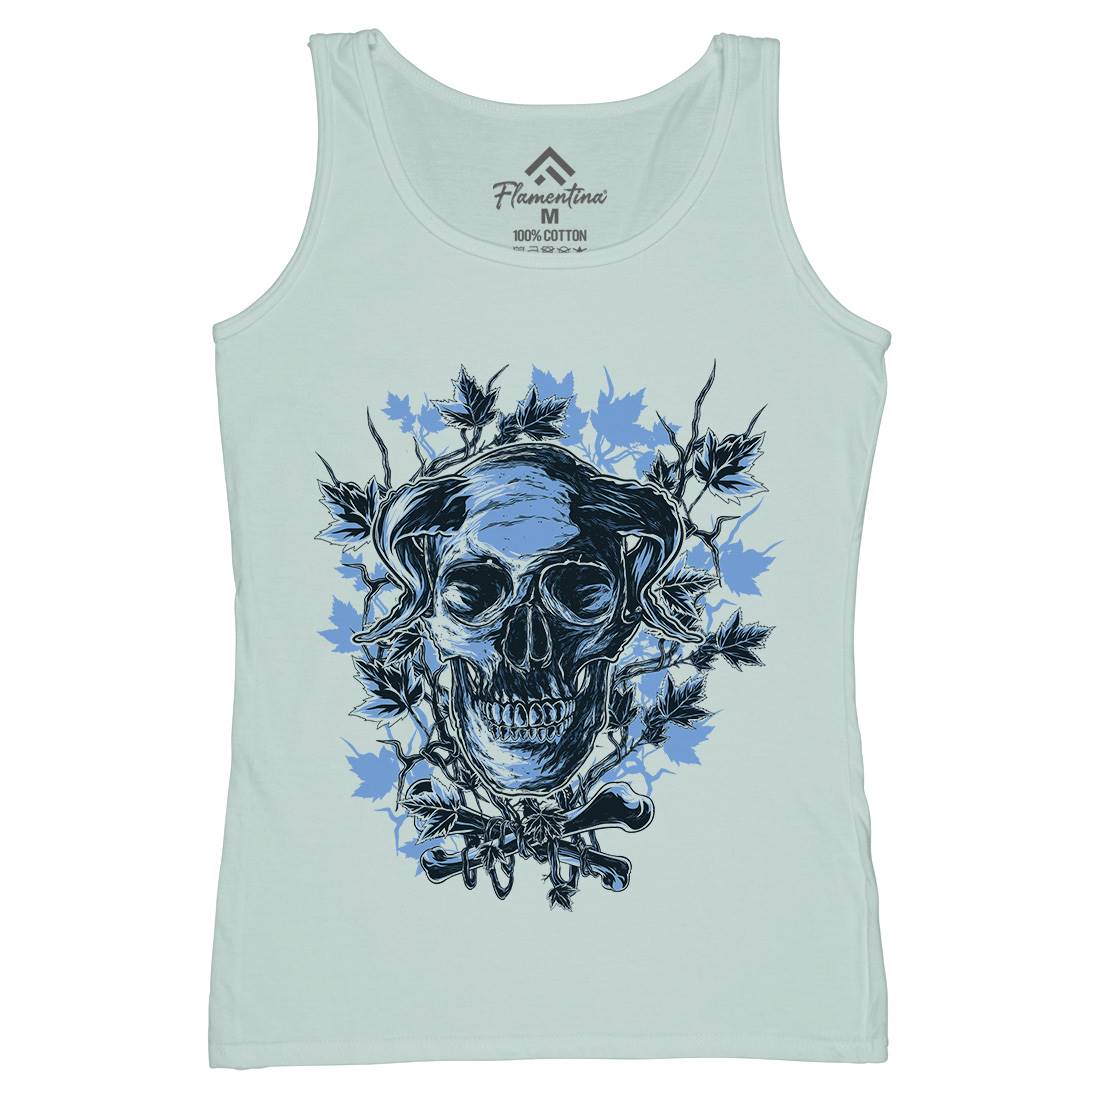 The Horned One Womens Organic Tank Top Vest Horror C986